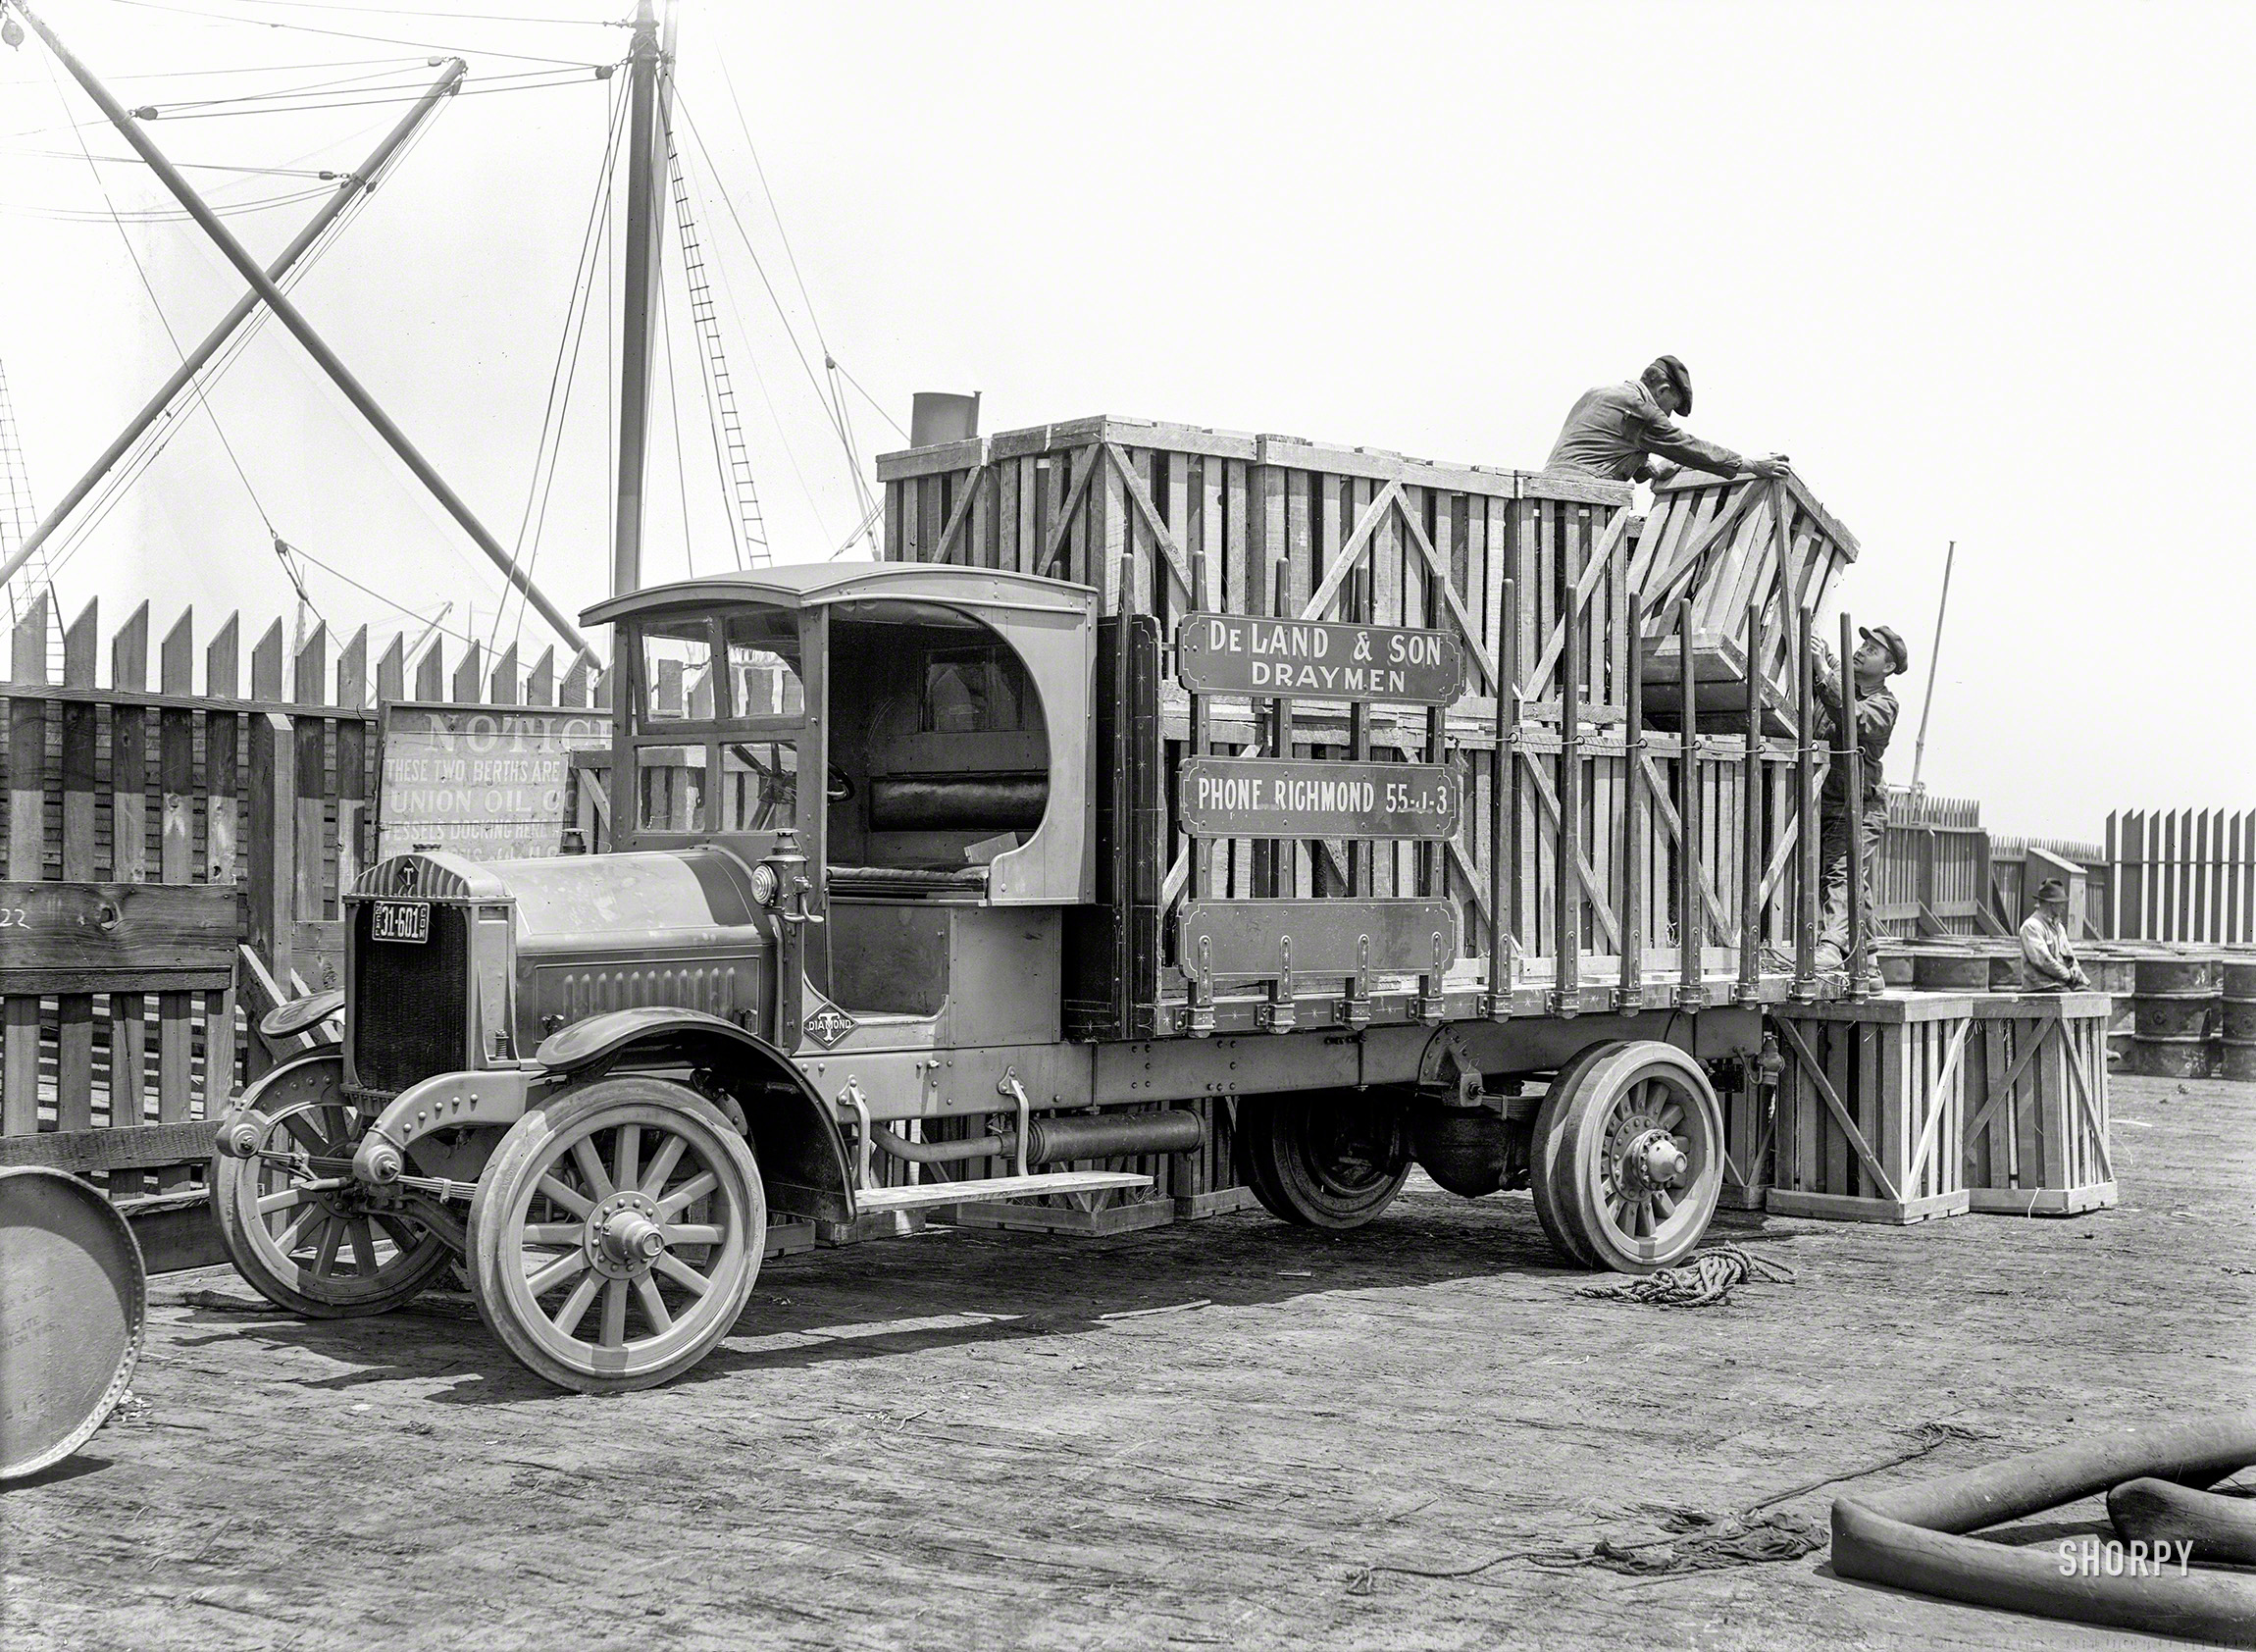 San Francisco, 1920. "Diamond T truck -- DeLand & Son Draymen." Draymen and drayage being haulage-related terms that eventually became as extinct as the Diamond T. 5x7 glass negative by Christopher Helin. View full size.